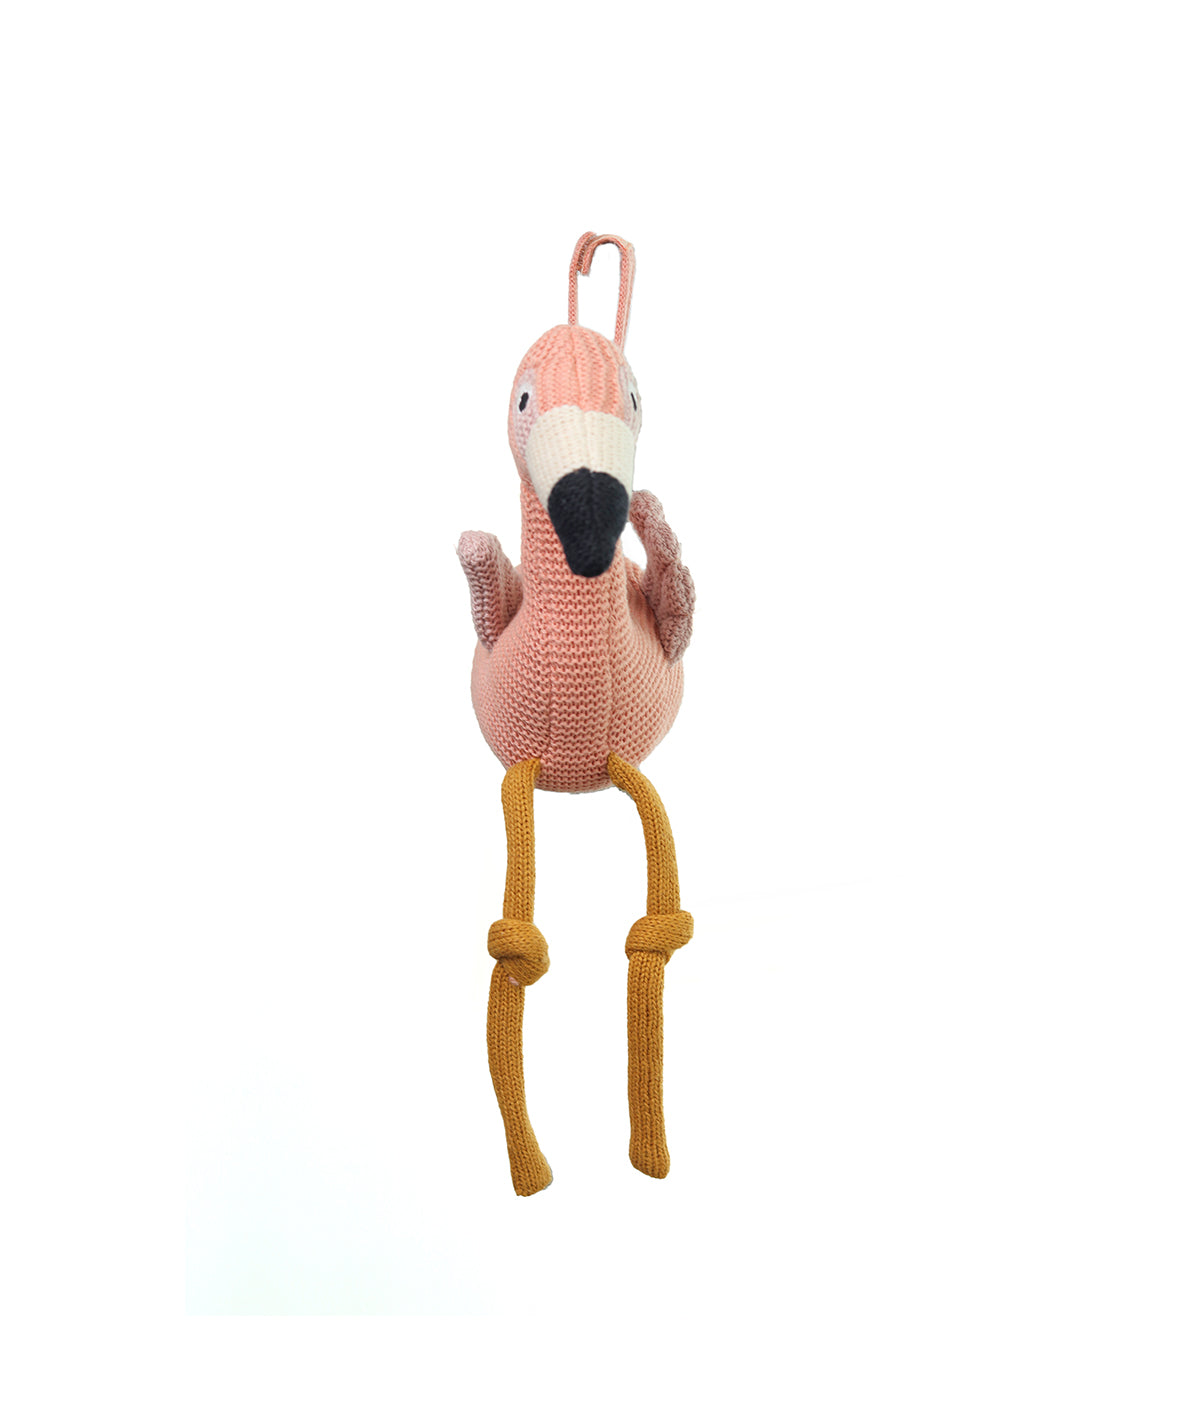 Flamingo Cotton Knitted Stuffed Soft Toy (Coral)